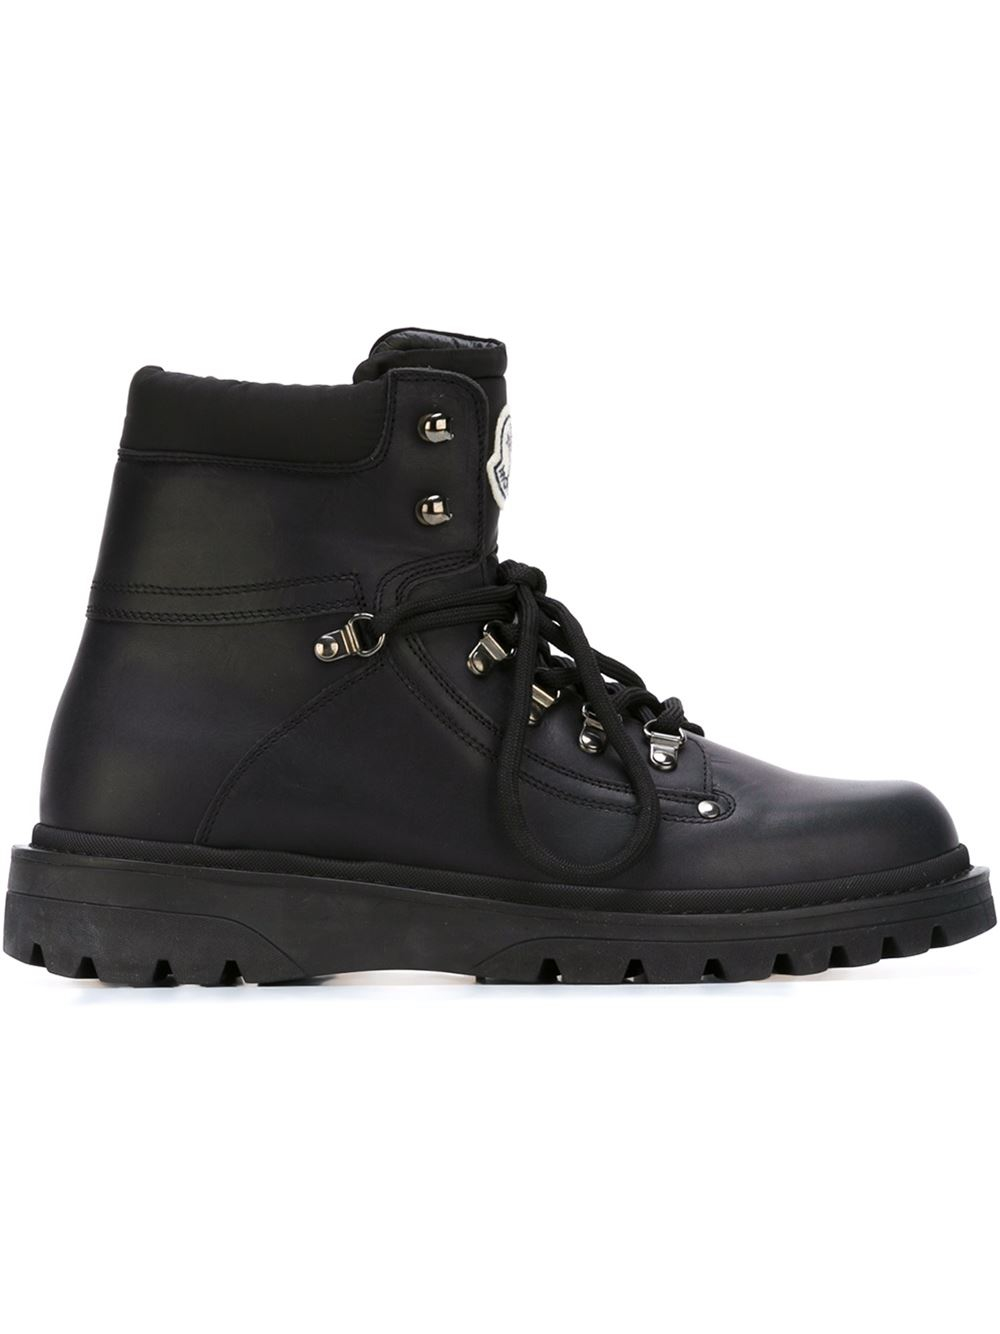 Moncler 'fanny' Snow Boots in Black for Men | Lyst